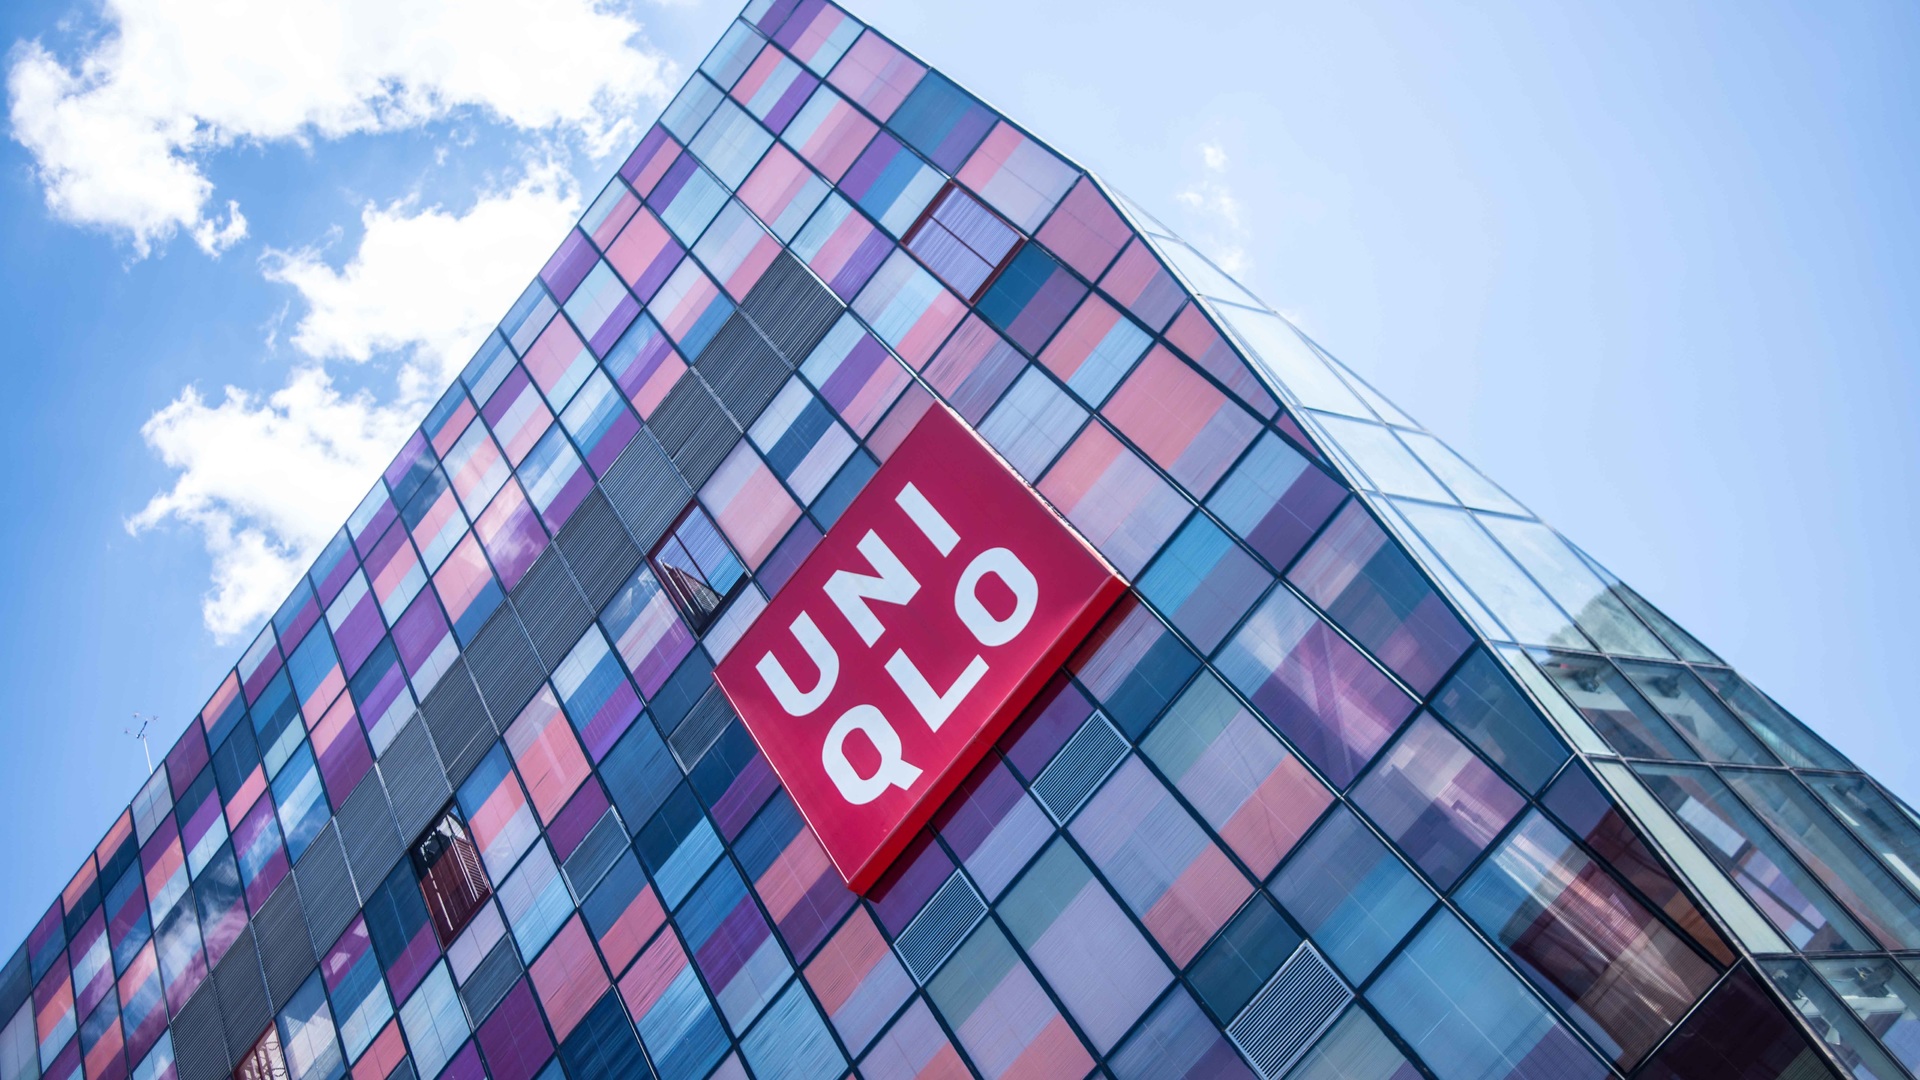 Uniqlo has more stores in China than in its birthplace Japan